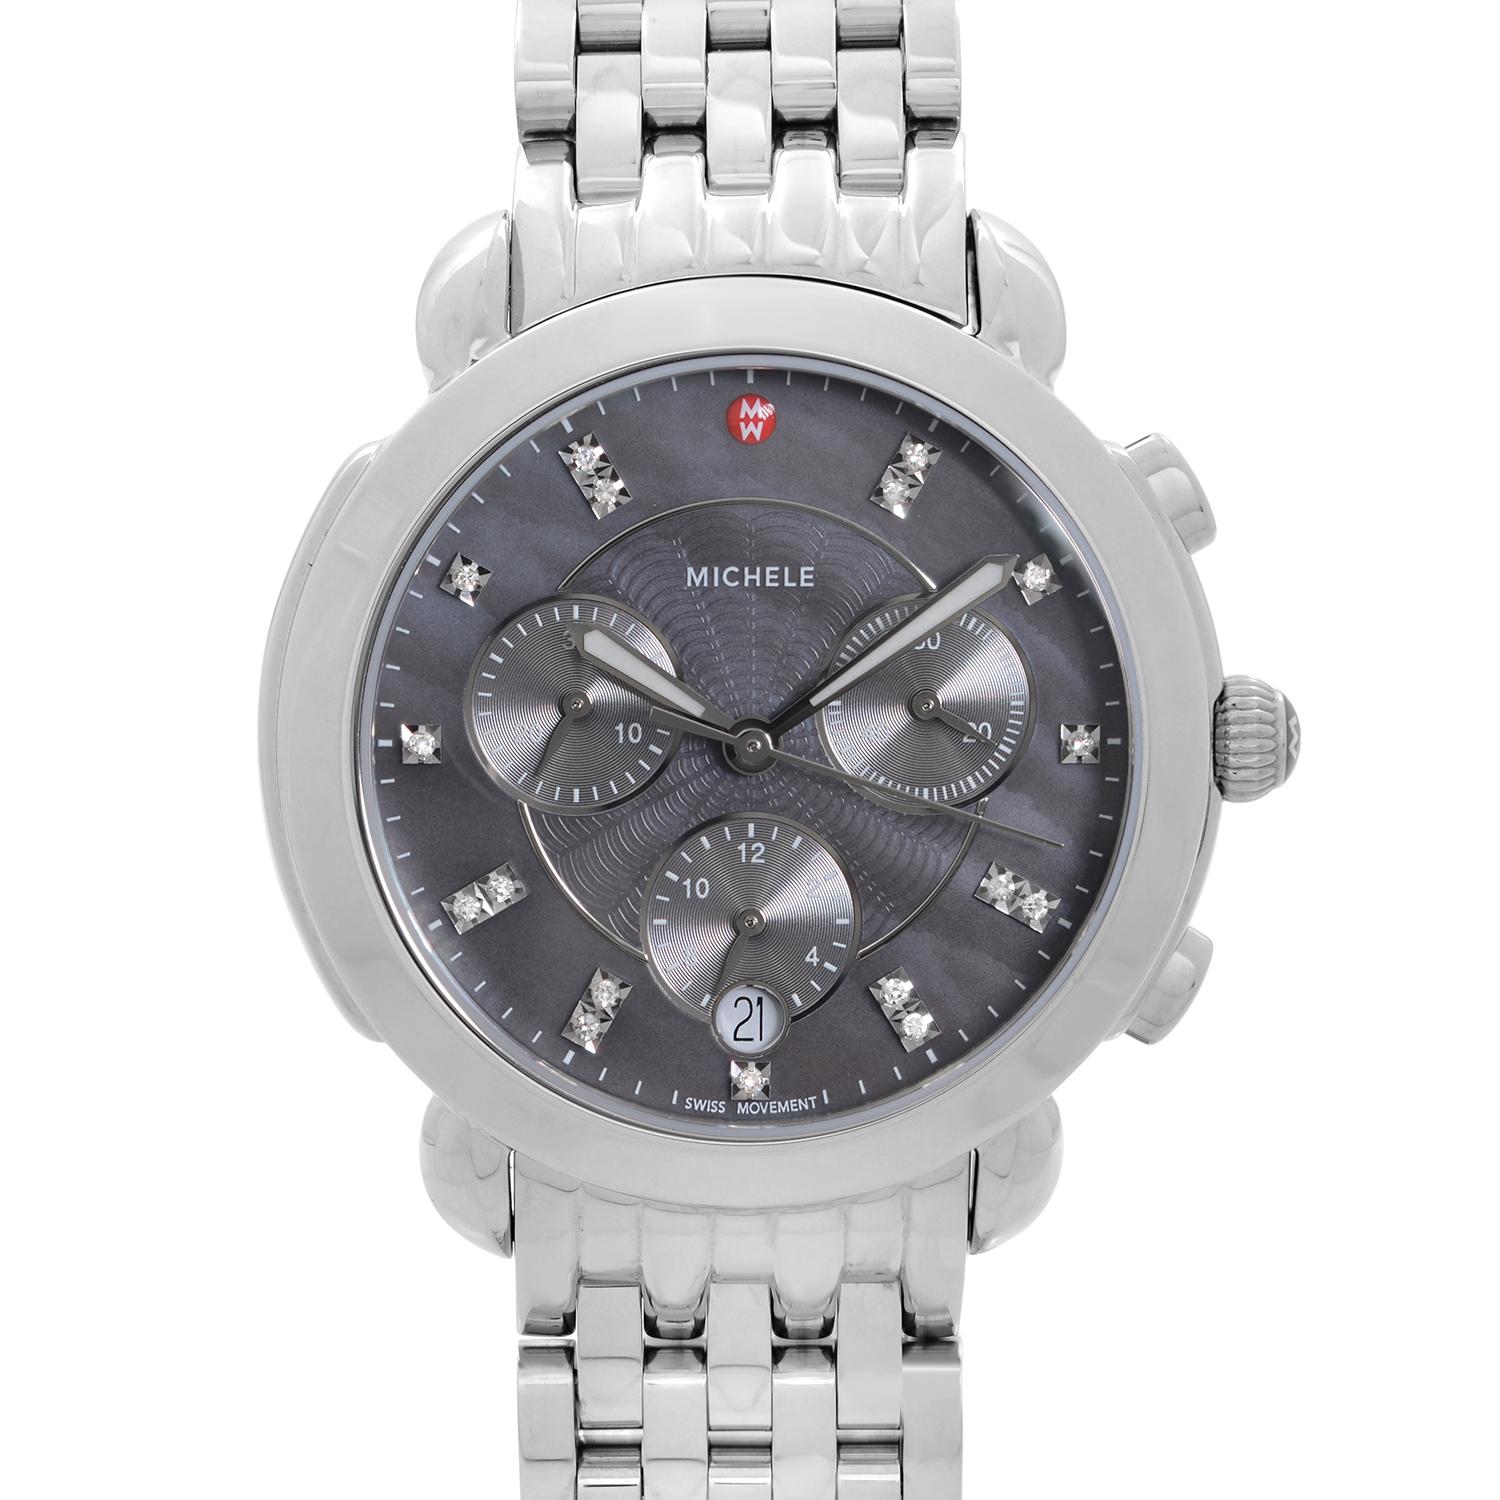 Store Display Model. Michele Sidney 36 Chronograph Steel Grey Diamond Dial Ladies Watch MWW30A000027 is This Beautiful Timepiece Features: Stainless Steel Case and Bracelet, Quartz Movement. Gray Dial With 3 different Sub-Dials. 30 Minute Sub-Dial